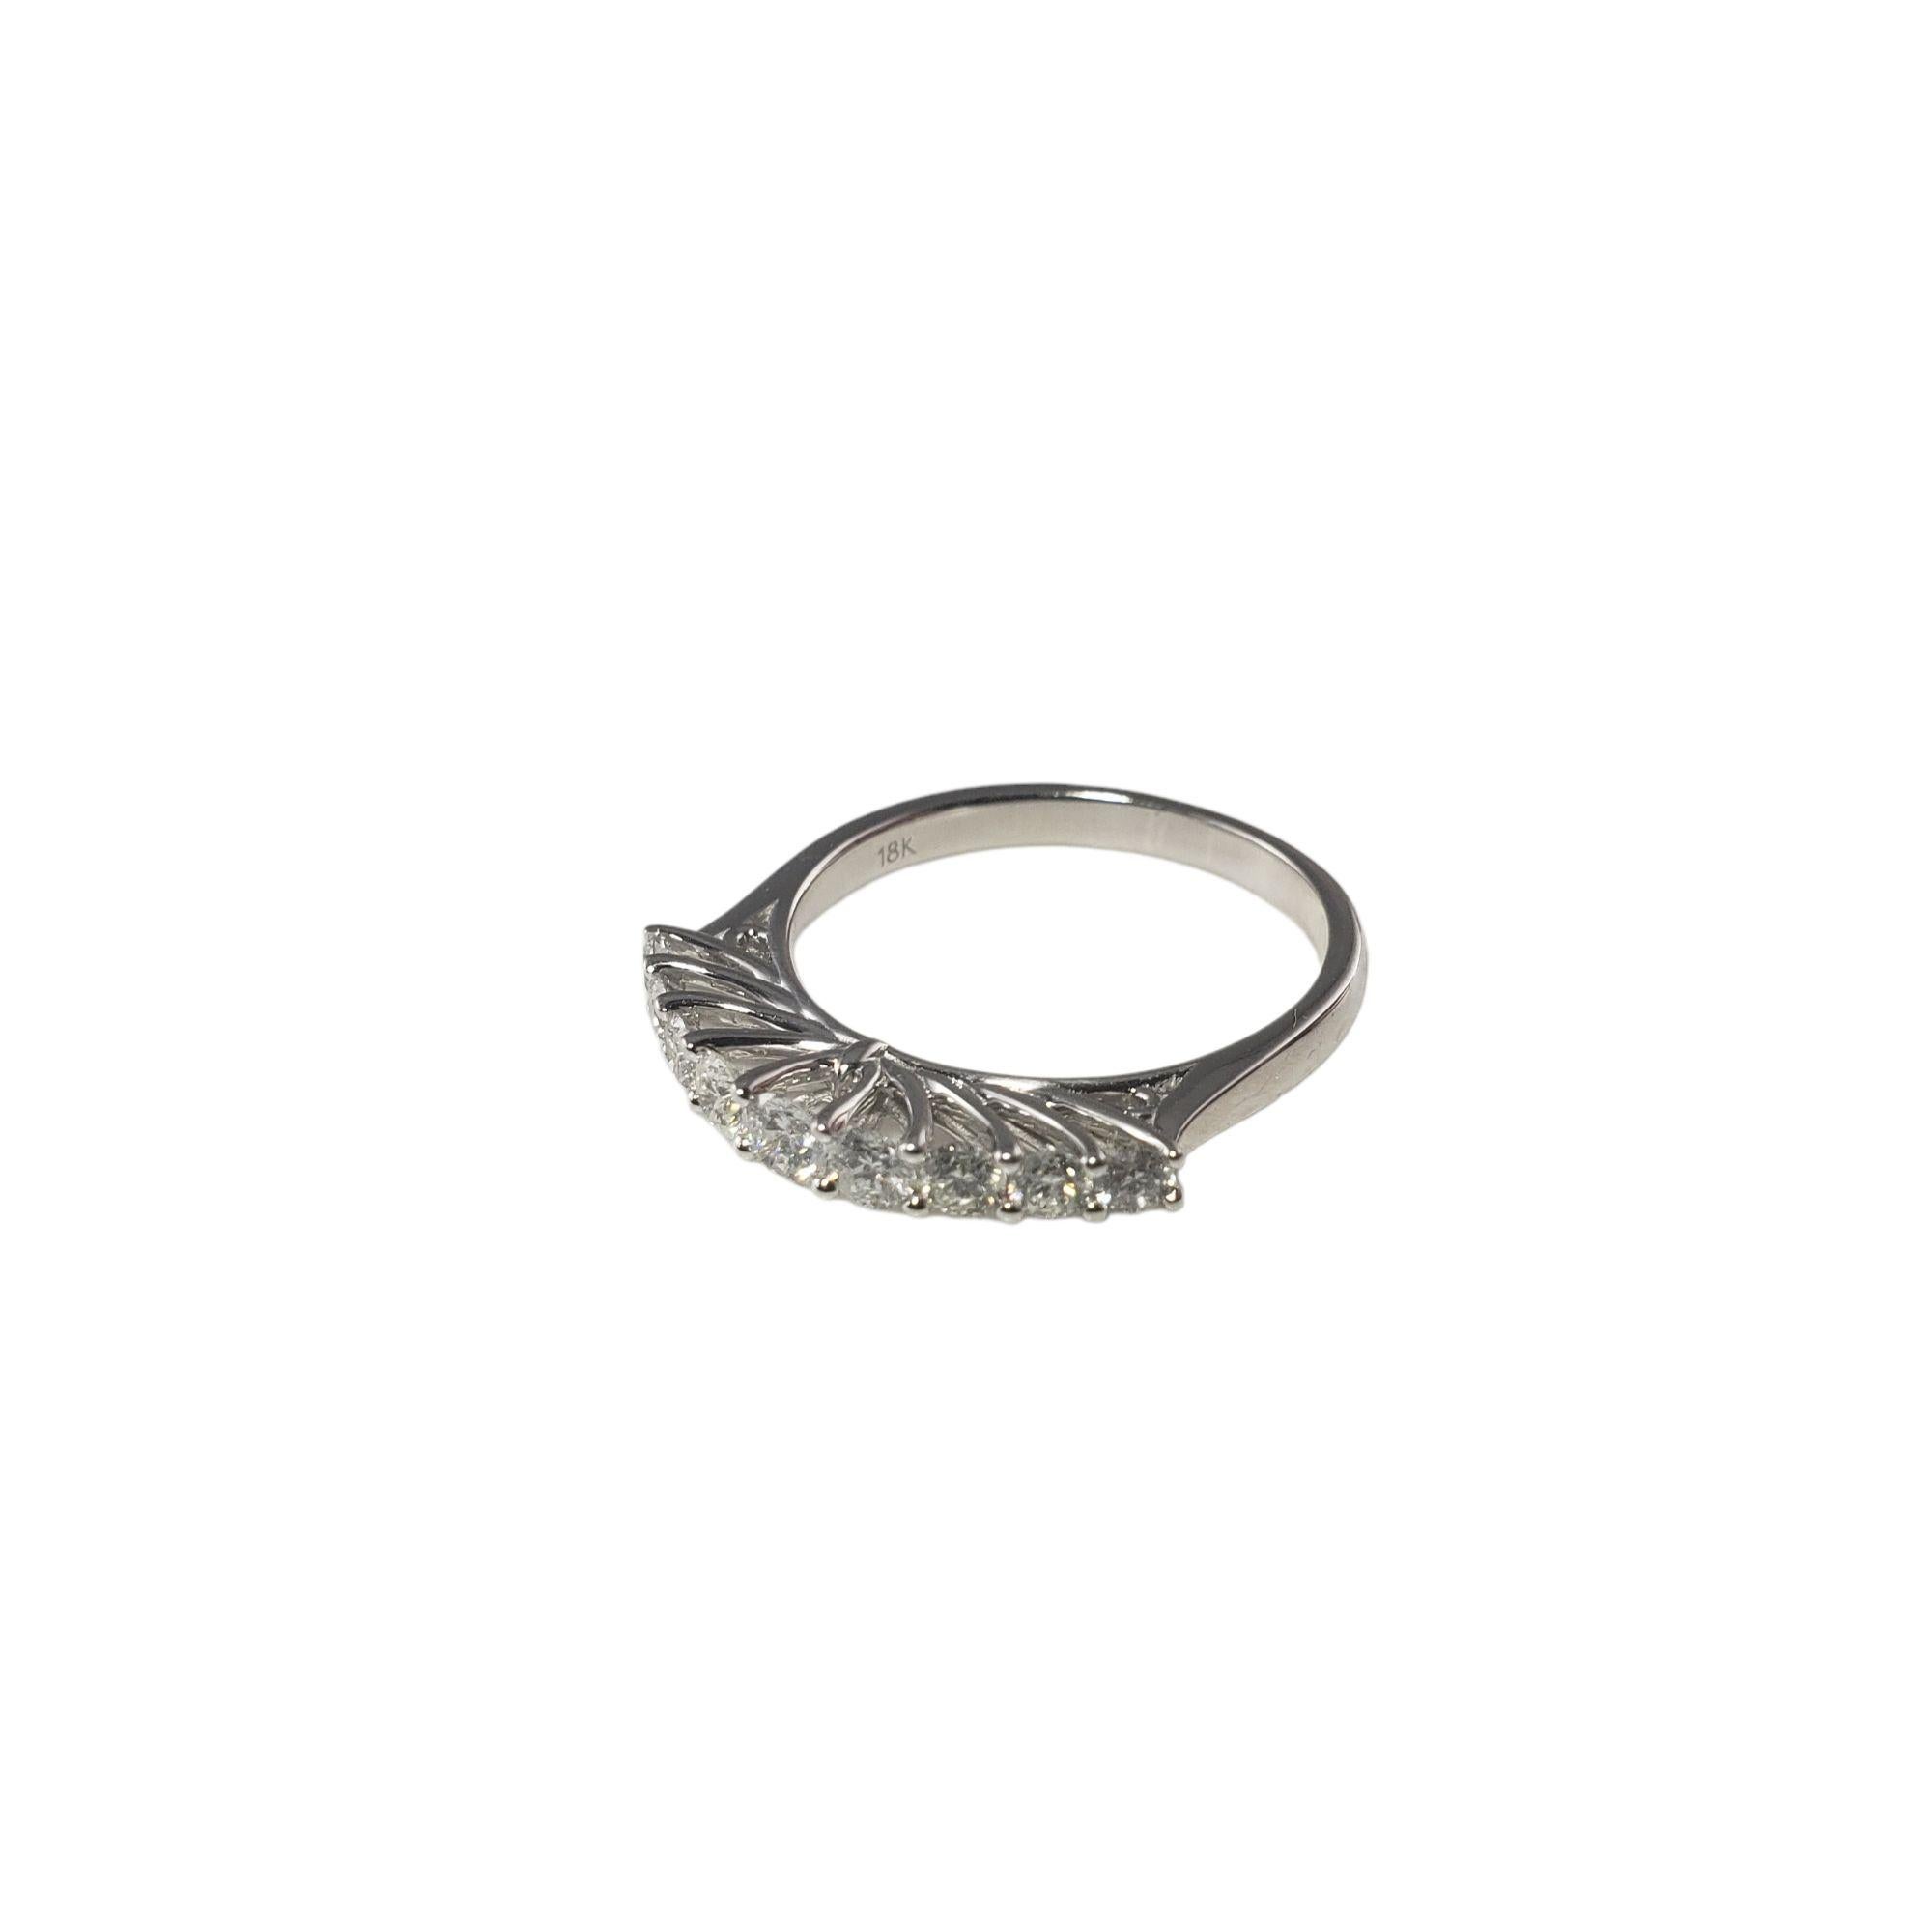 18 Karat White Gold and Diamond Ring Size 6.5 #14744 In Good Condition For Sale In Washington Depot, CT